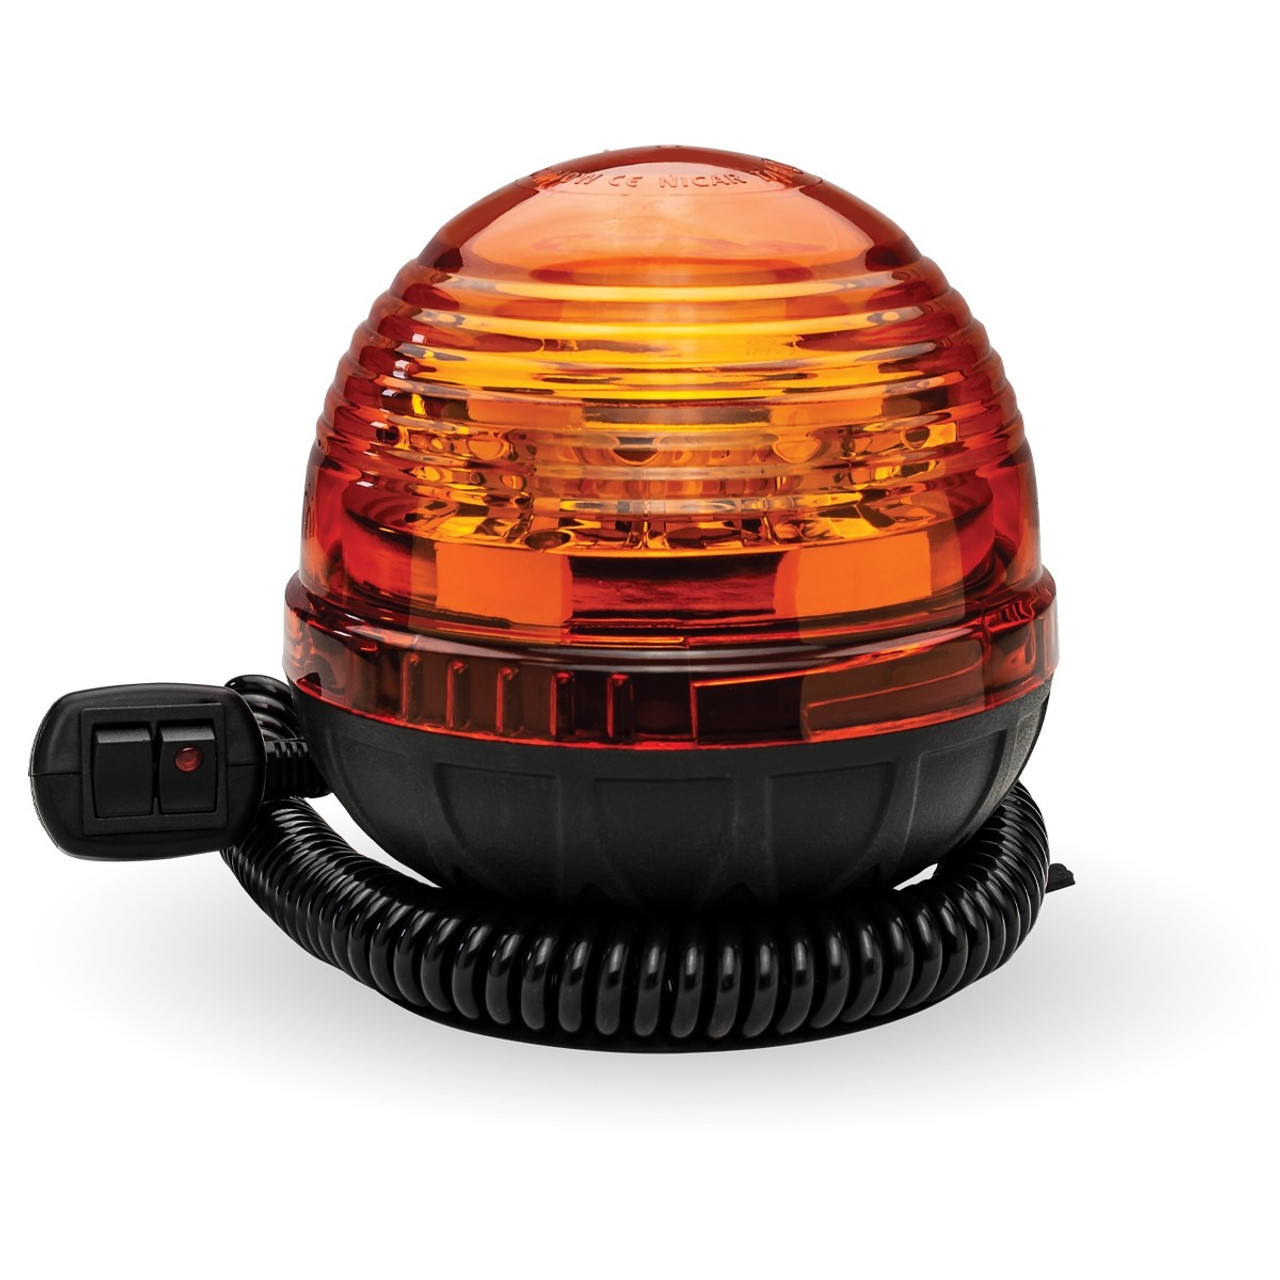 12 Amber Dome LED Strobe Light with 3 Flash Patterns Vacuum Magnetic Mount